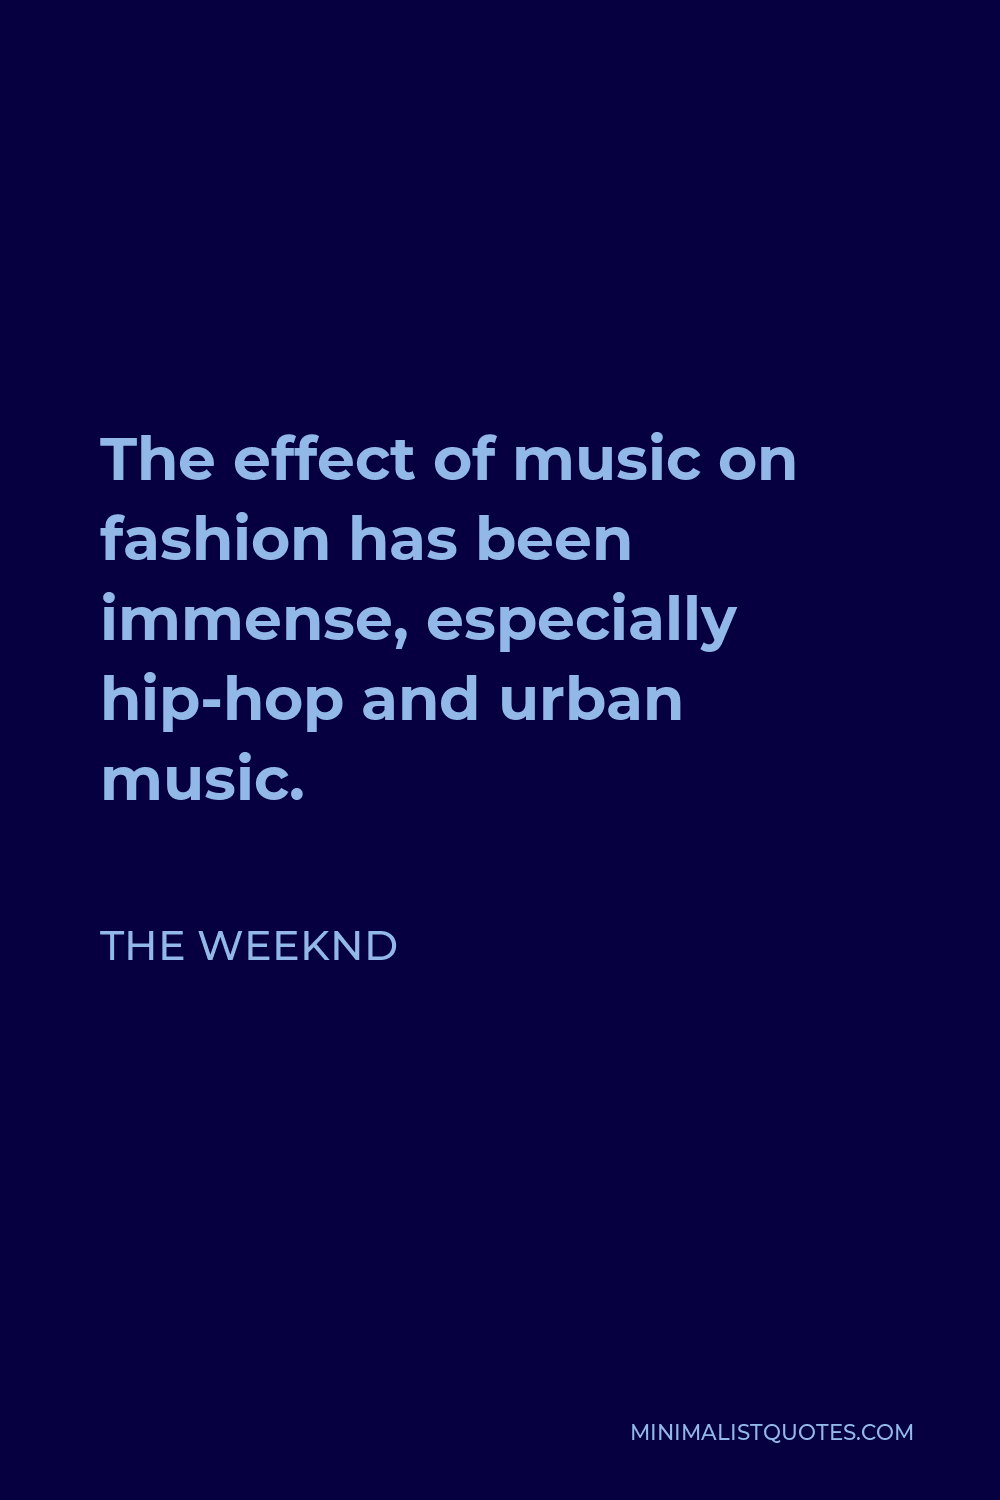 The Weeknd Quote - The effect of music on fashion has been immense, especially hip-hop and urban music.